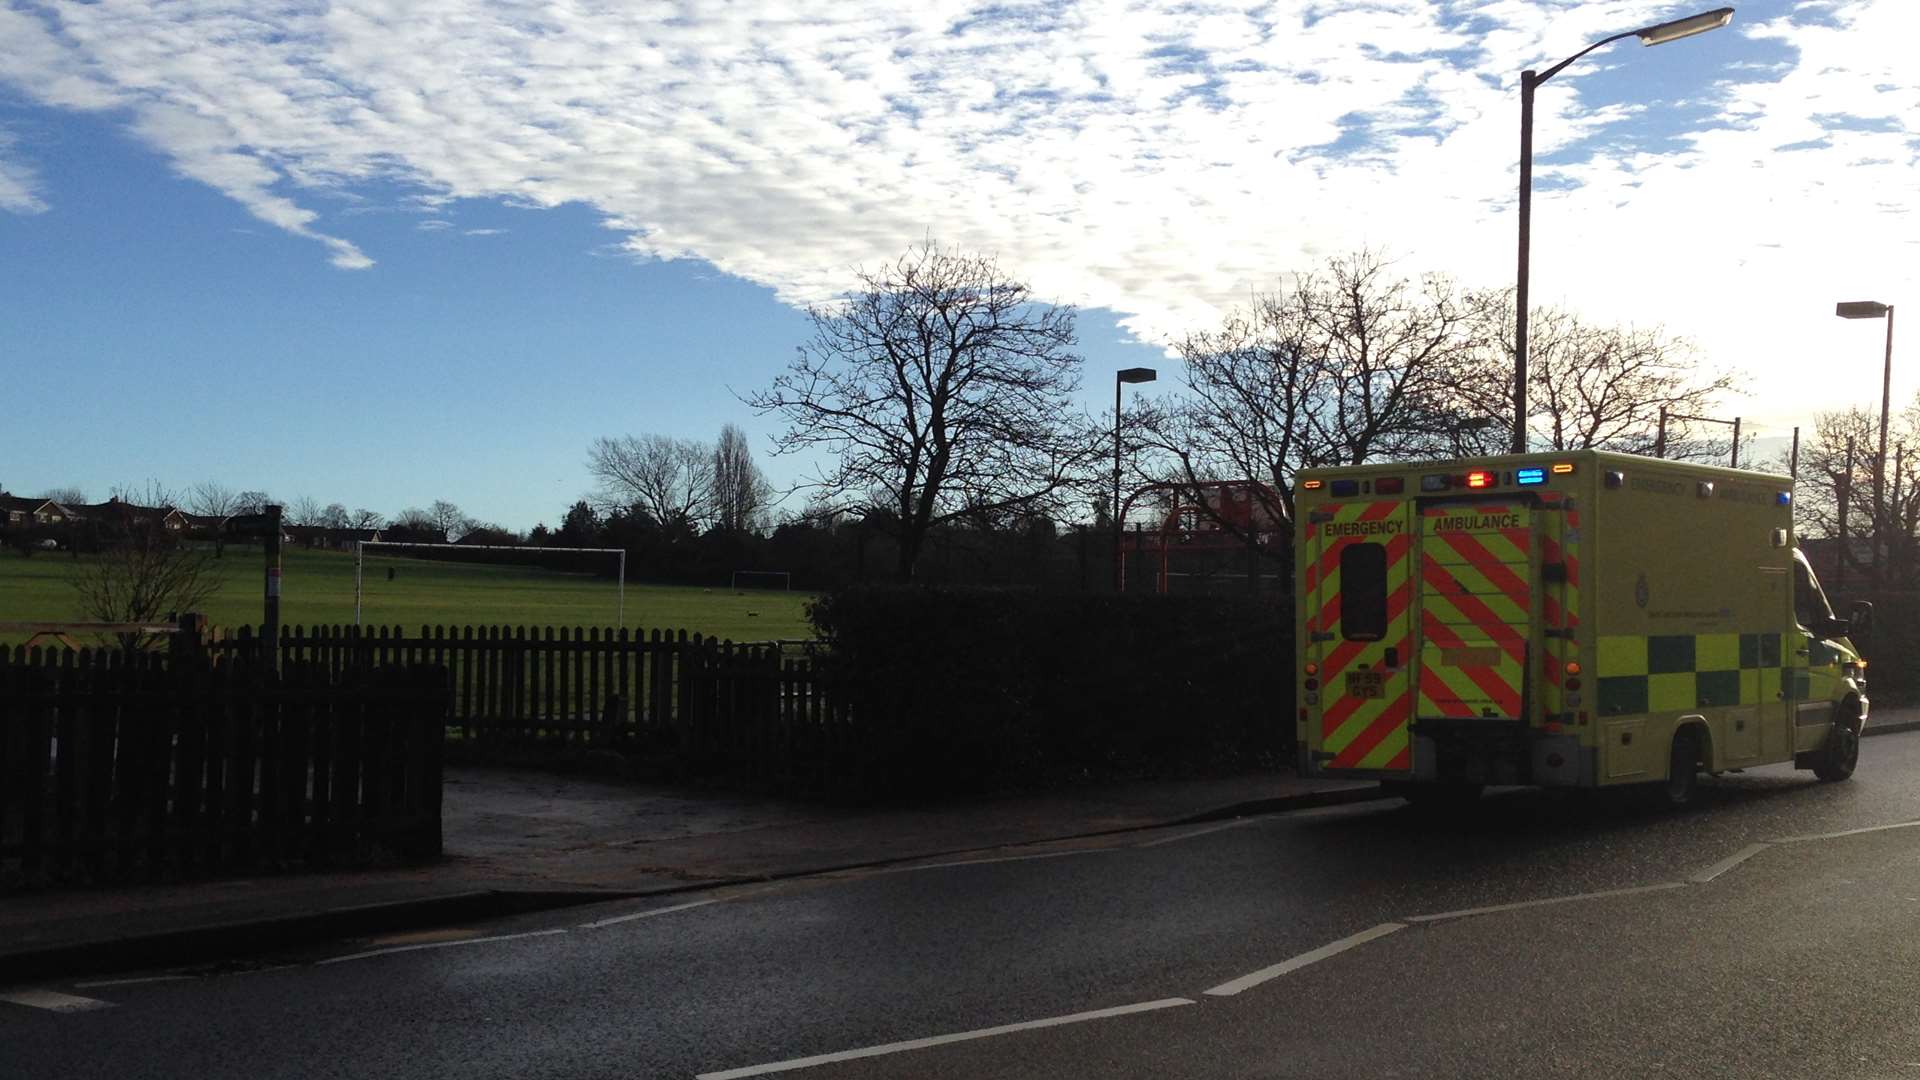 Ambulance crews transported the man to the park to be airlifted